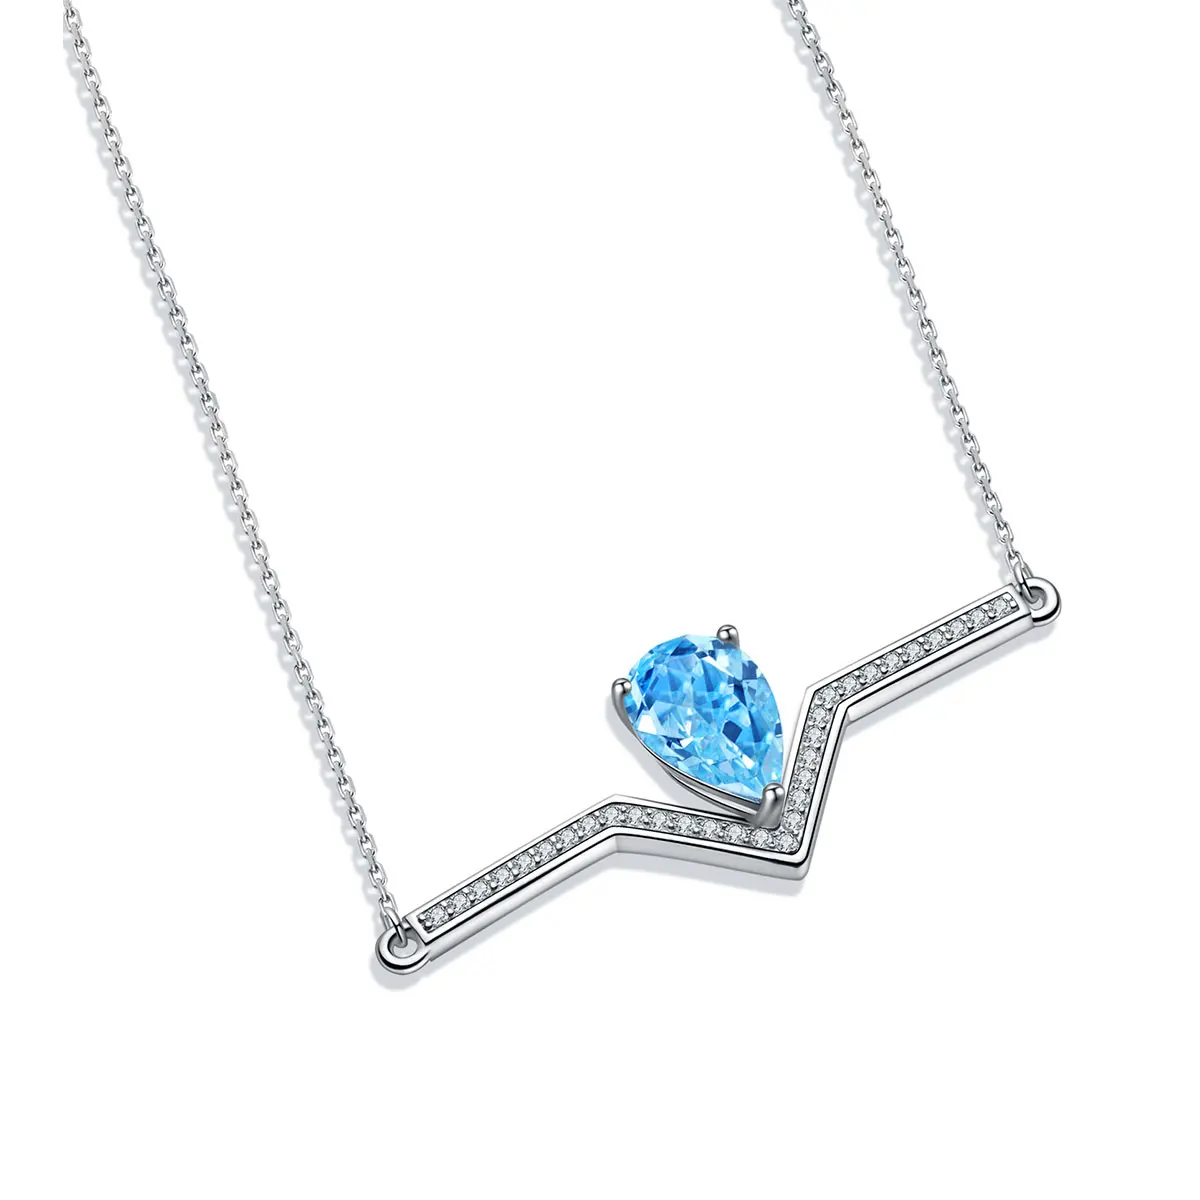 

Anster jewelry S925 sterling silver lab grown aquamarine necklace pear shape heartbeat design pendant jewelry, Blue